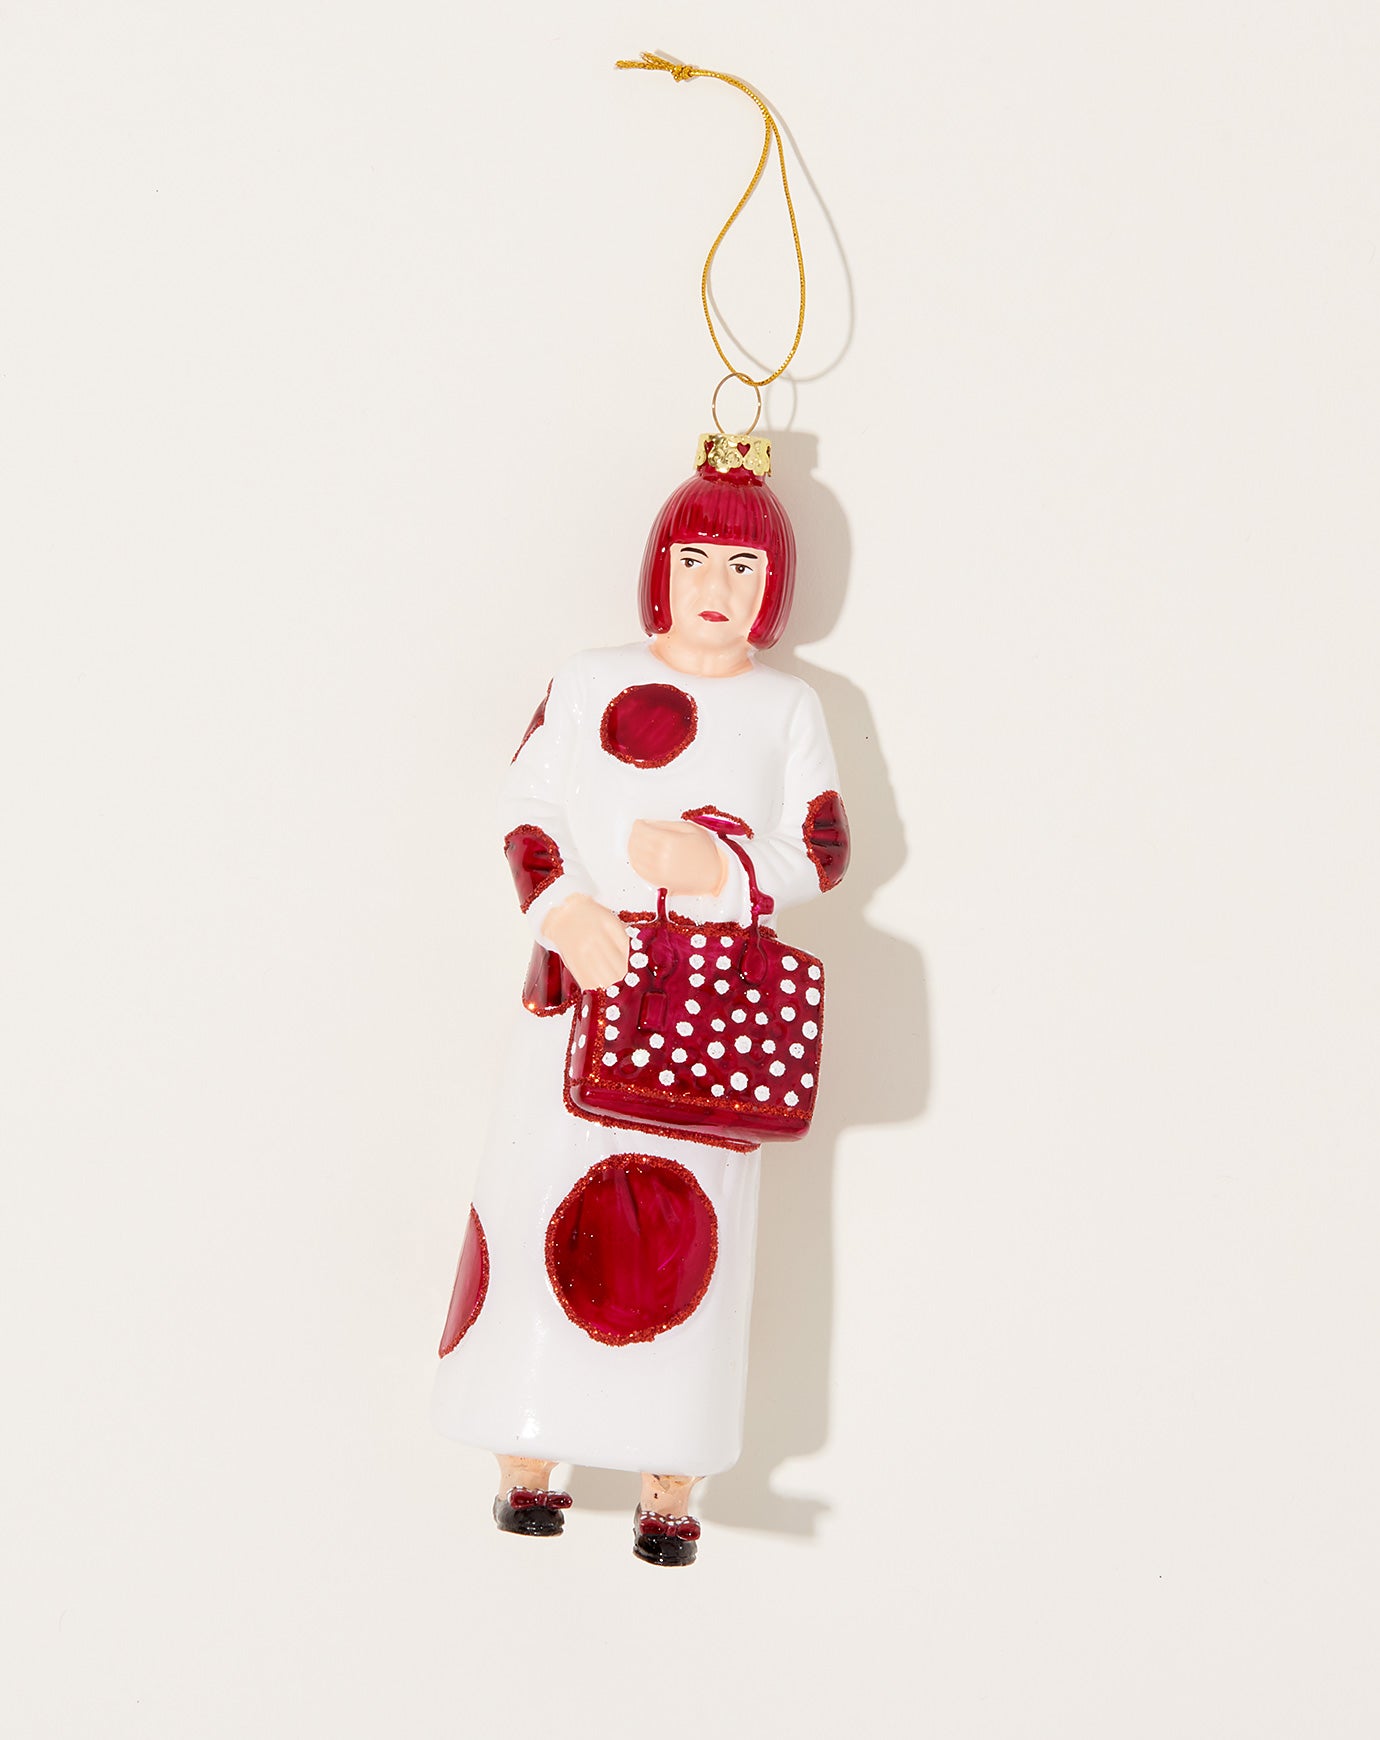 Cody Foster Yayoi Kusama Ornament in White and Red